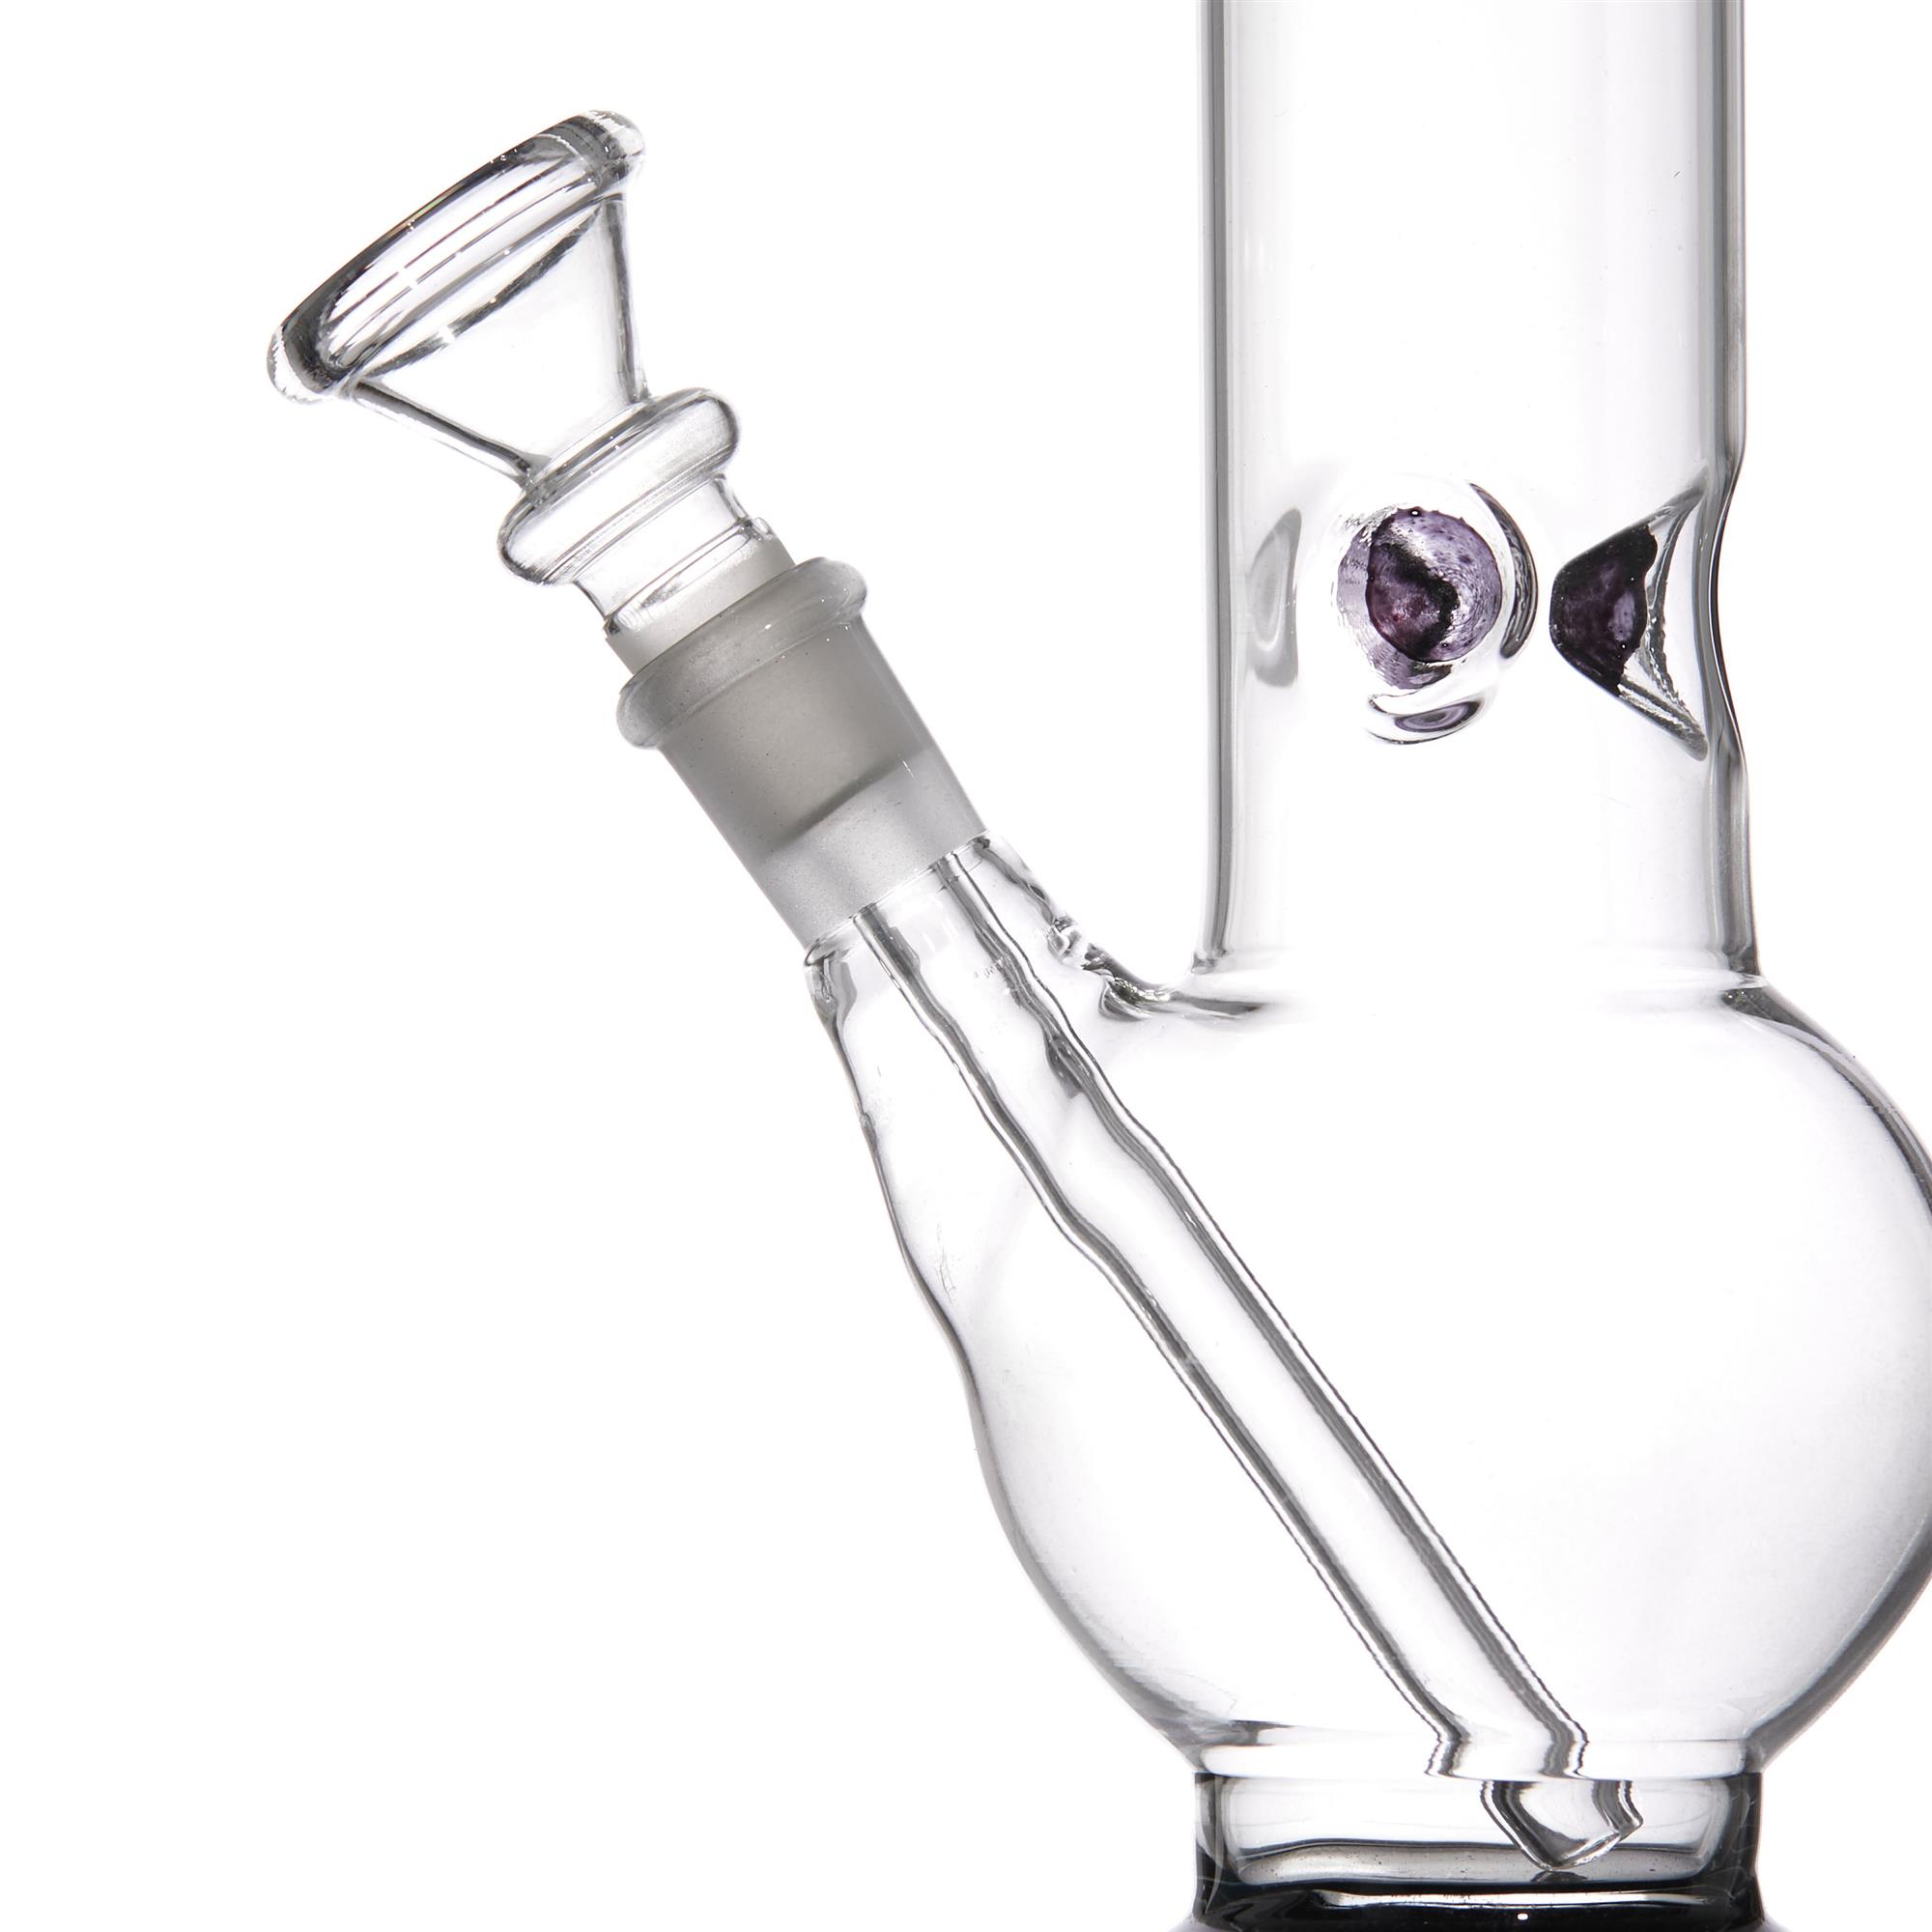 STRICTLY FOR REAL STONERS BONG